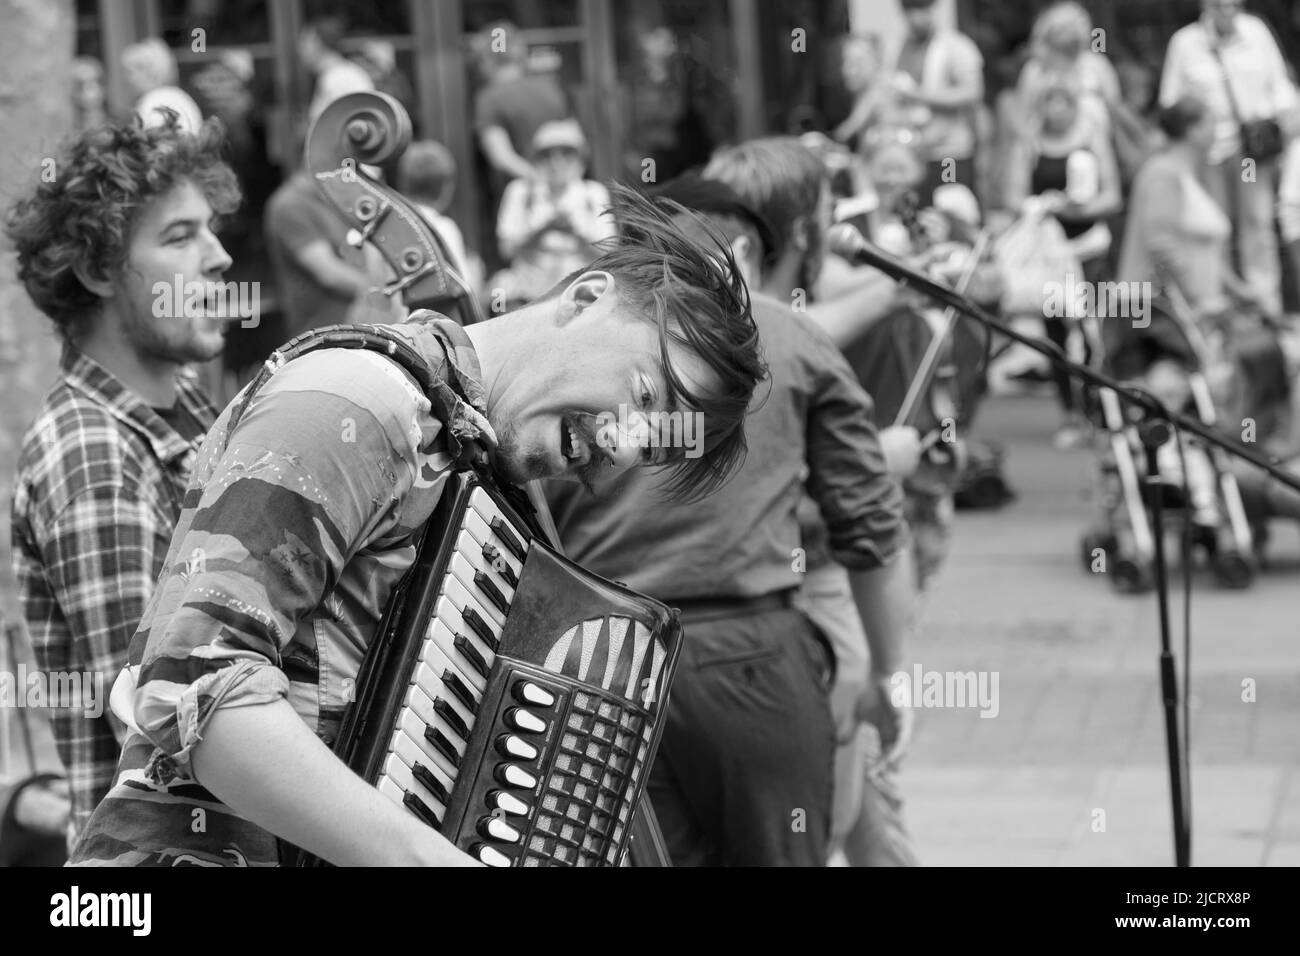 Hyde Family Jam folk band playing on a York city street, with a close-up of the accordion player, North Yorkshire, England, UK. Stock Photo